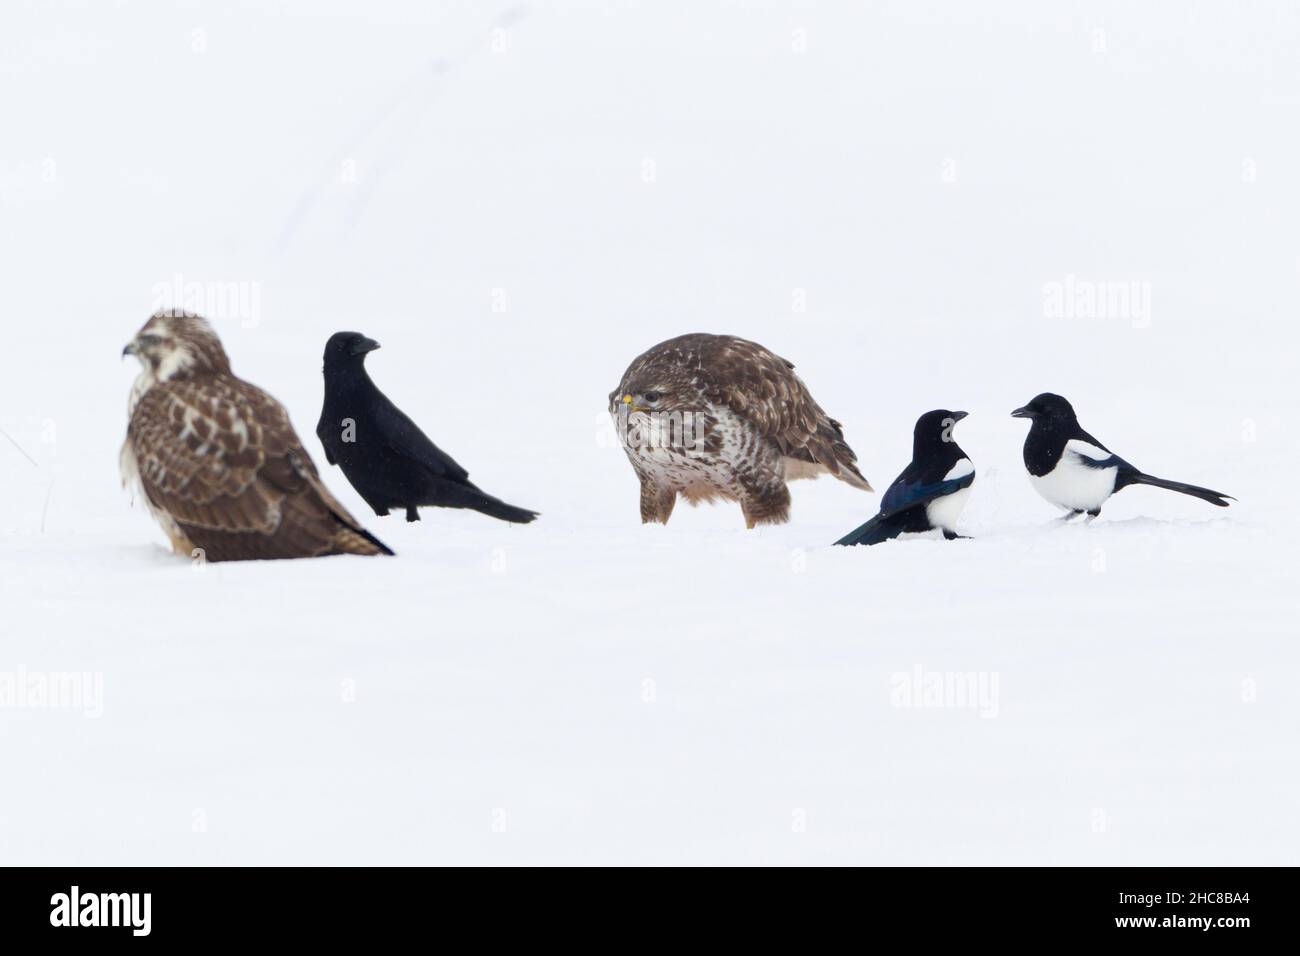 Common Buzzard, (Buteo buteo), carrion crow (Corvus corone), and Magpies, (Pica pica), feeding on carrion, in winter, Lower Saxony, Germany Stock Photo